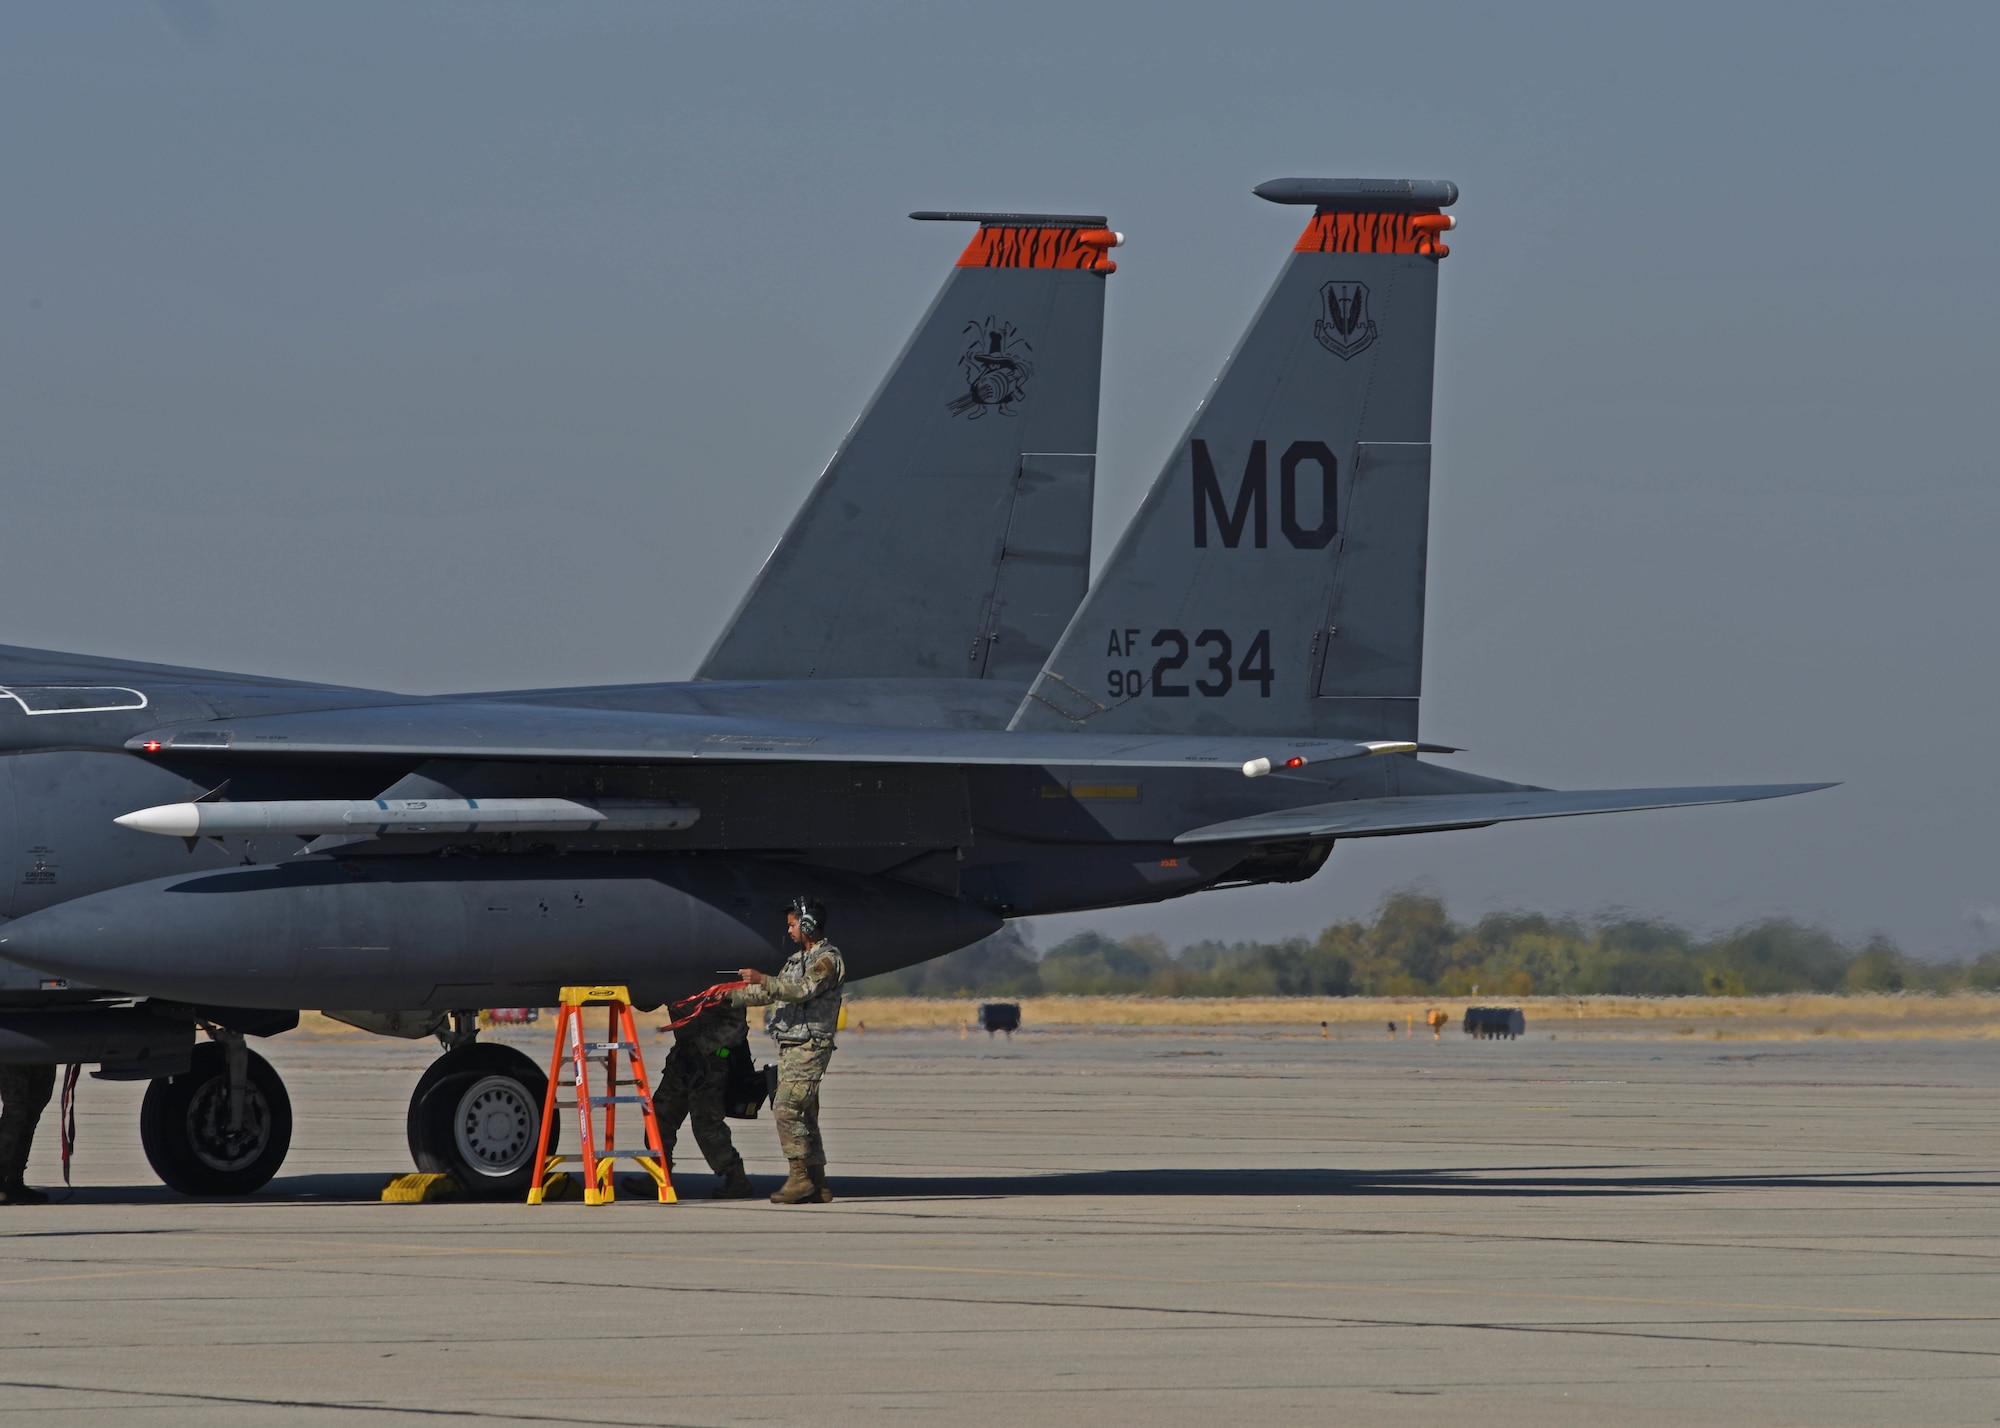 U.S. Airmen with the 366th Munitions Squadron prepare to load munitions onto an F-15E Strike Eagle from the 366th Fighter Wing at Mountain Home Air Force Base, Idaho, during Exercise Rainier War 22B at Gowen Field, Boise, Idaho, Oct. 20, 2022. Rainier War is a semi-annual exercise designed to demonstrate the 62d Airlift Wing, 627th Air Base Group and 446th Airlift Wing’s ability to generate, employ and sustain operations; alongside joint partners like the 366th FW. (U.S. Air Force photo by Staff Sgt. Zoe Thacker)